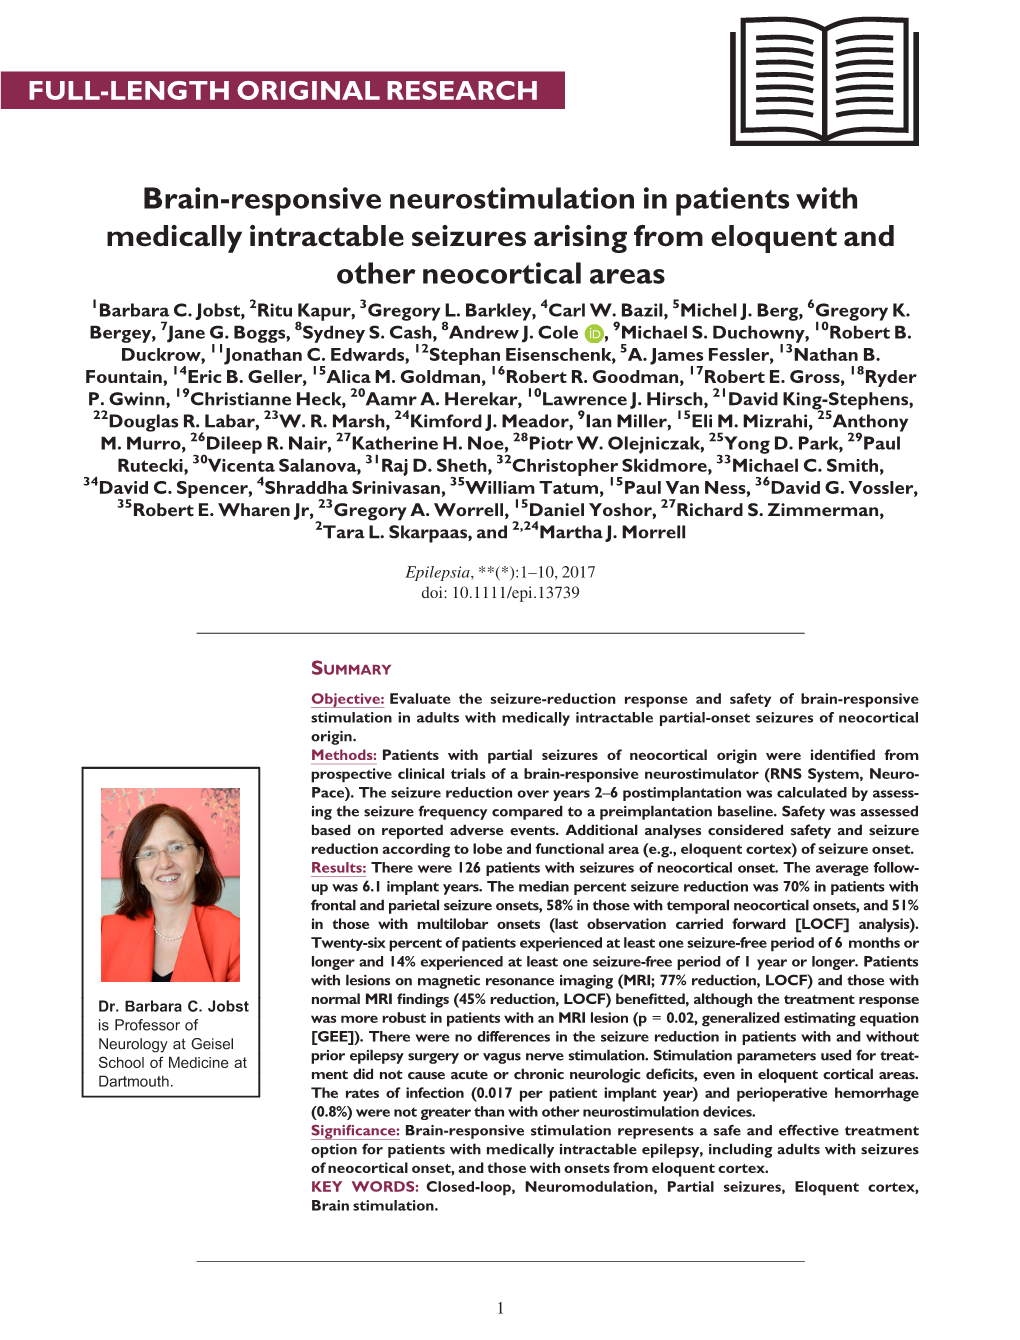 Brain‐Responsive Neurostimulation in Patients with Medically Intractable Seizures Arising from Eloquent and Other Neocortical